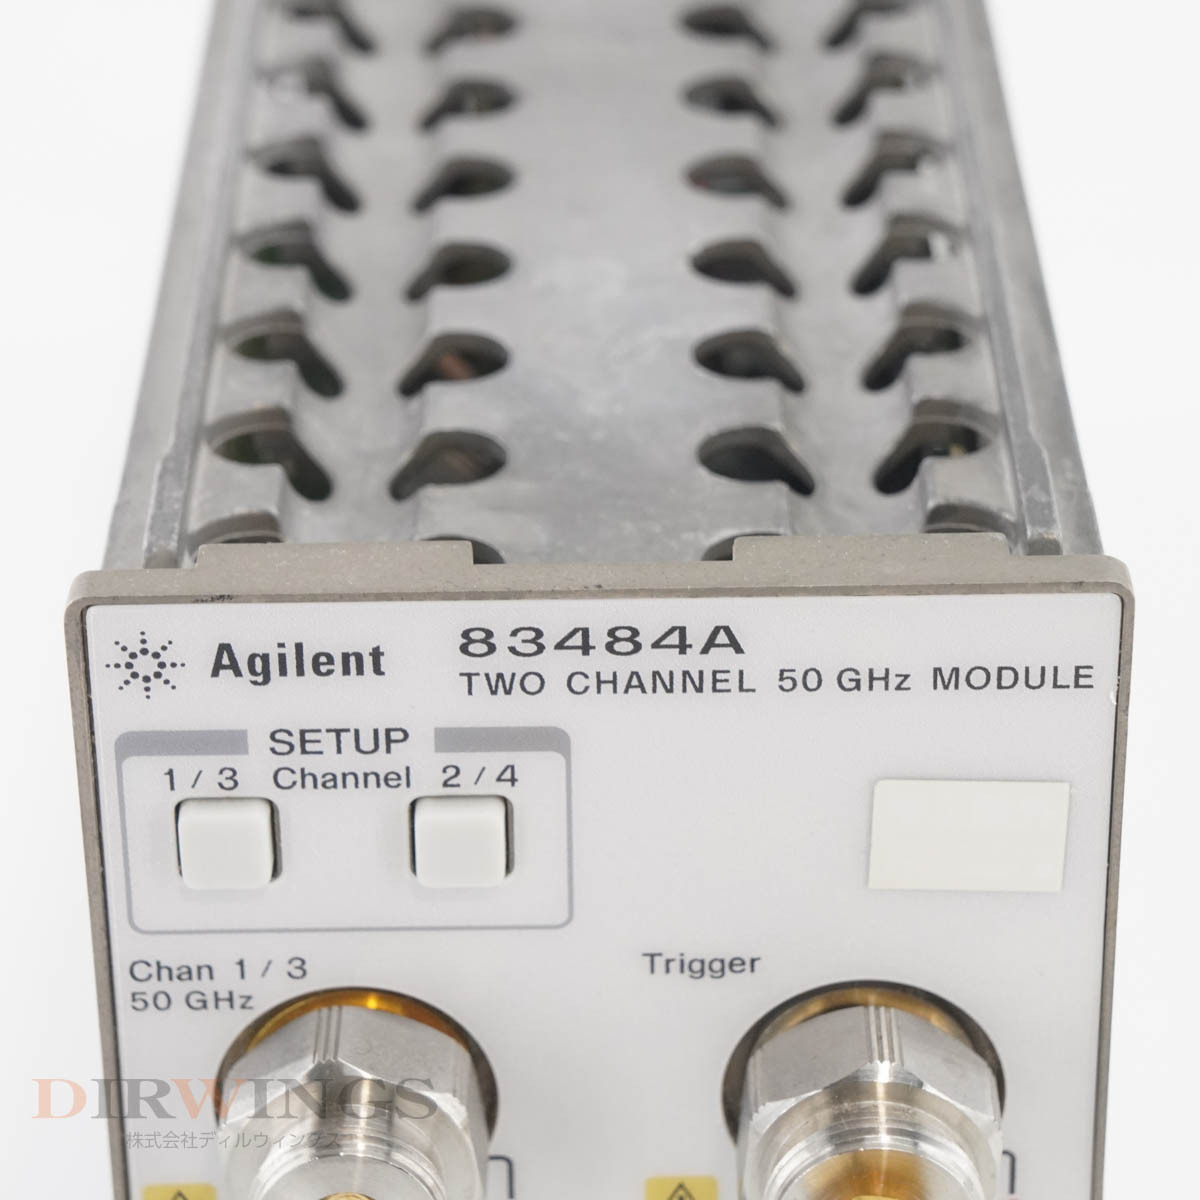 [DW] 8日保証 83484A Agilent OPT UK6 アジレント hp Keysight キーサイト TWO CHANNEL 50GHz Electrical Module 電気モジ...[05791-1437]の画像4